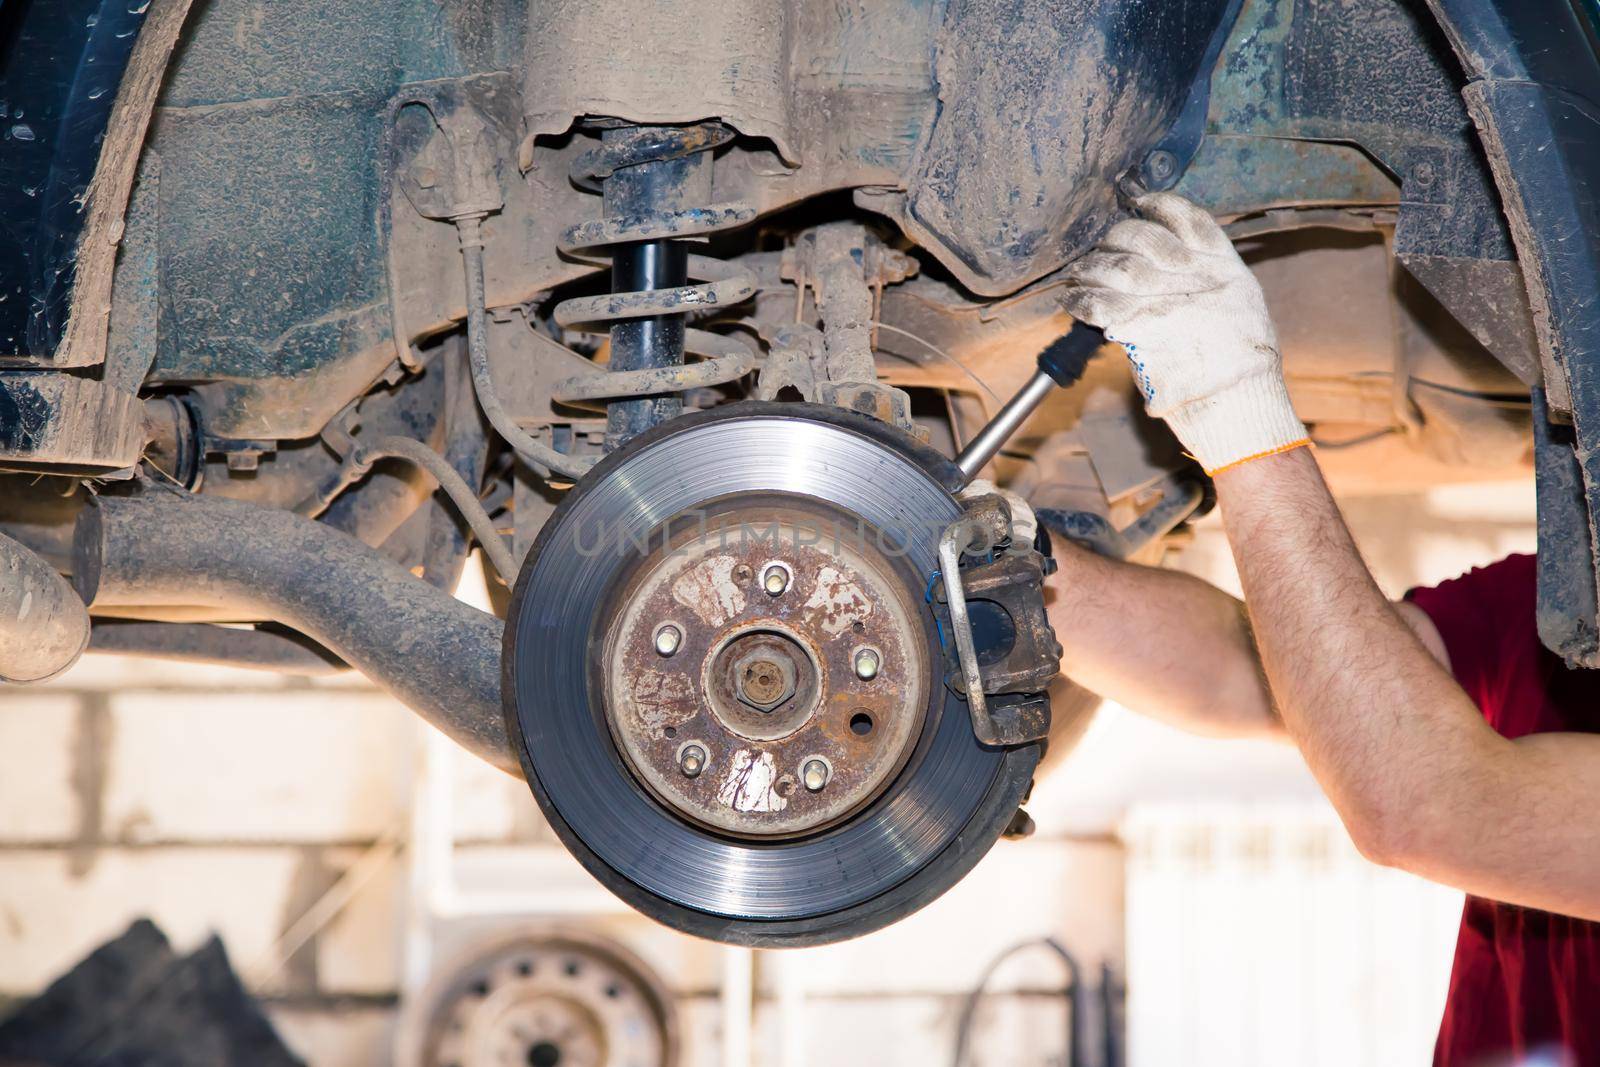 The man's hands remove the worn and rusty rear wheel caliper. In the garage, a person changes the failed parts on the vehicle. Small business concept, car repair and maintenance service.